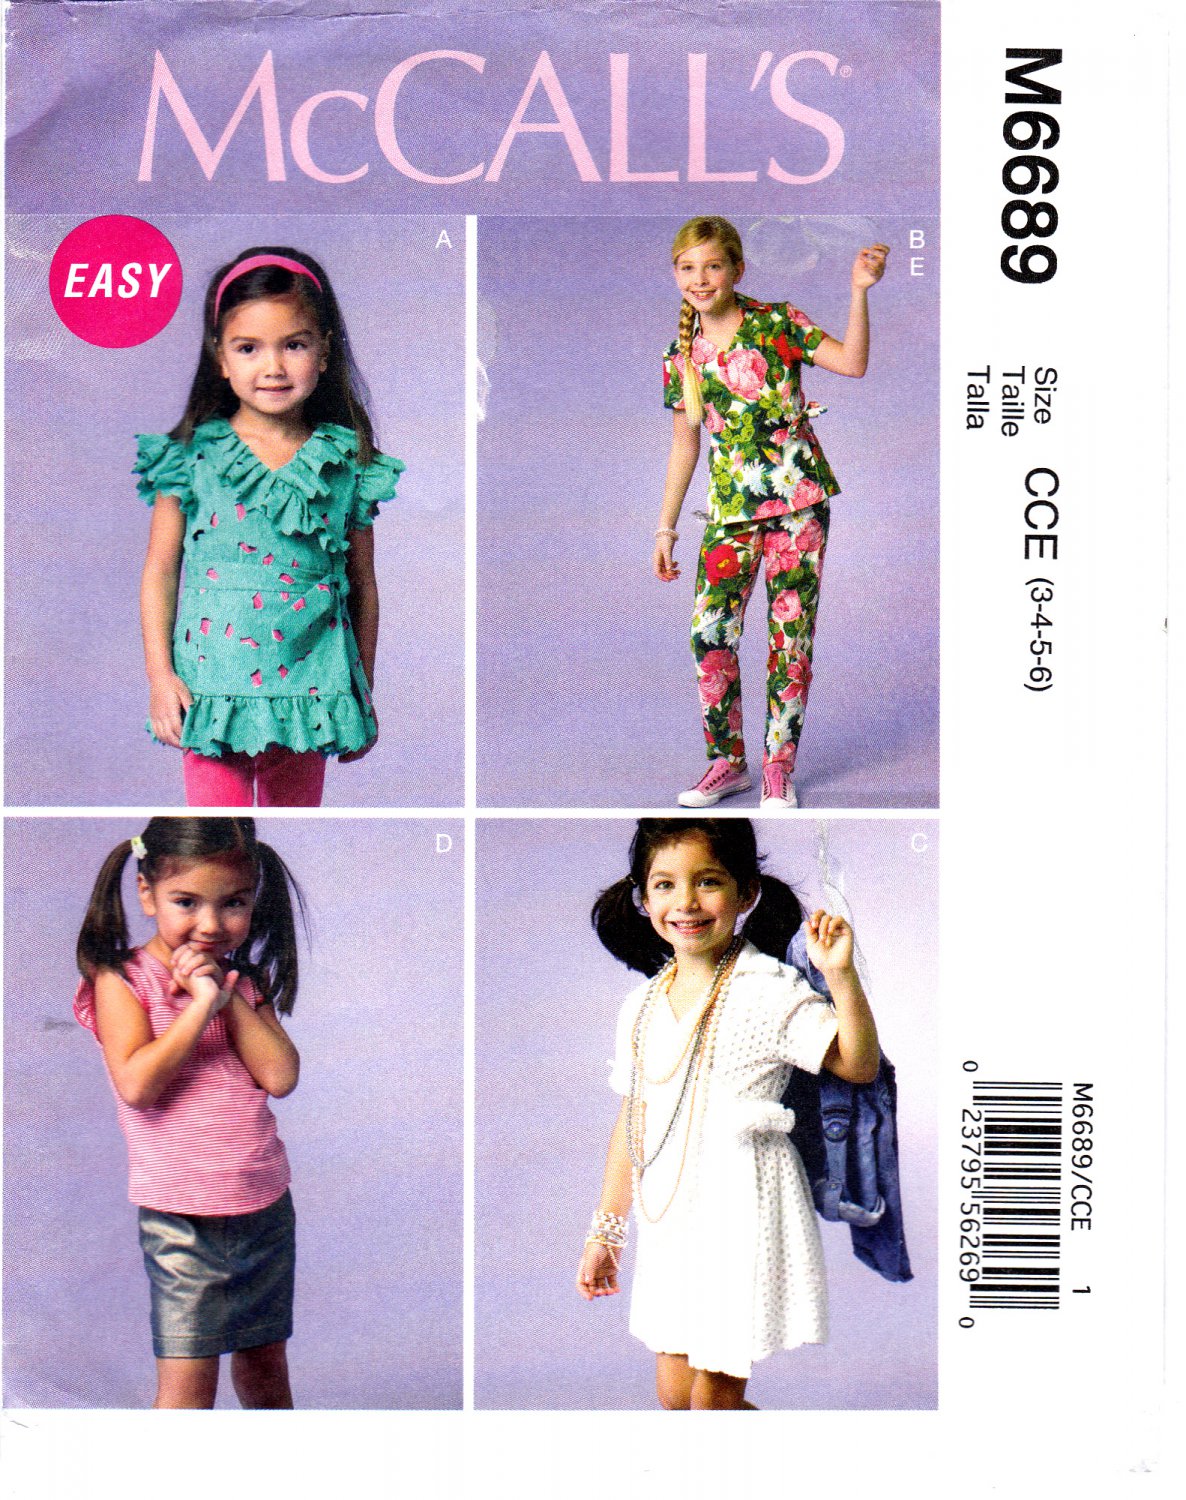 McCall's 6689 M6689 Girls Sewing Pattern Childrens Tops Dress Skirt Pant Kids Sizes 3-4-5-6 Easy Sew